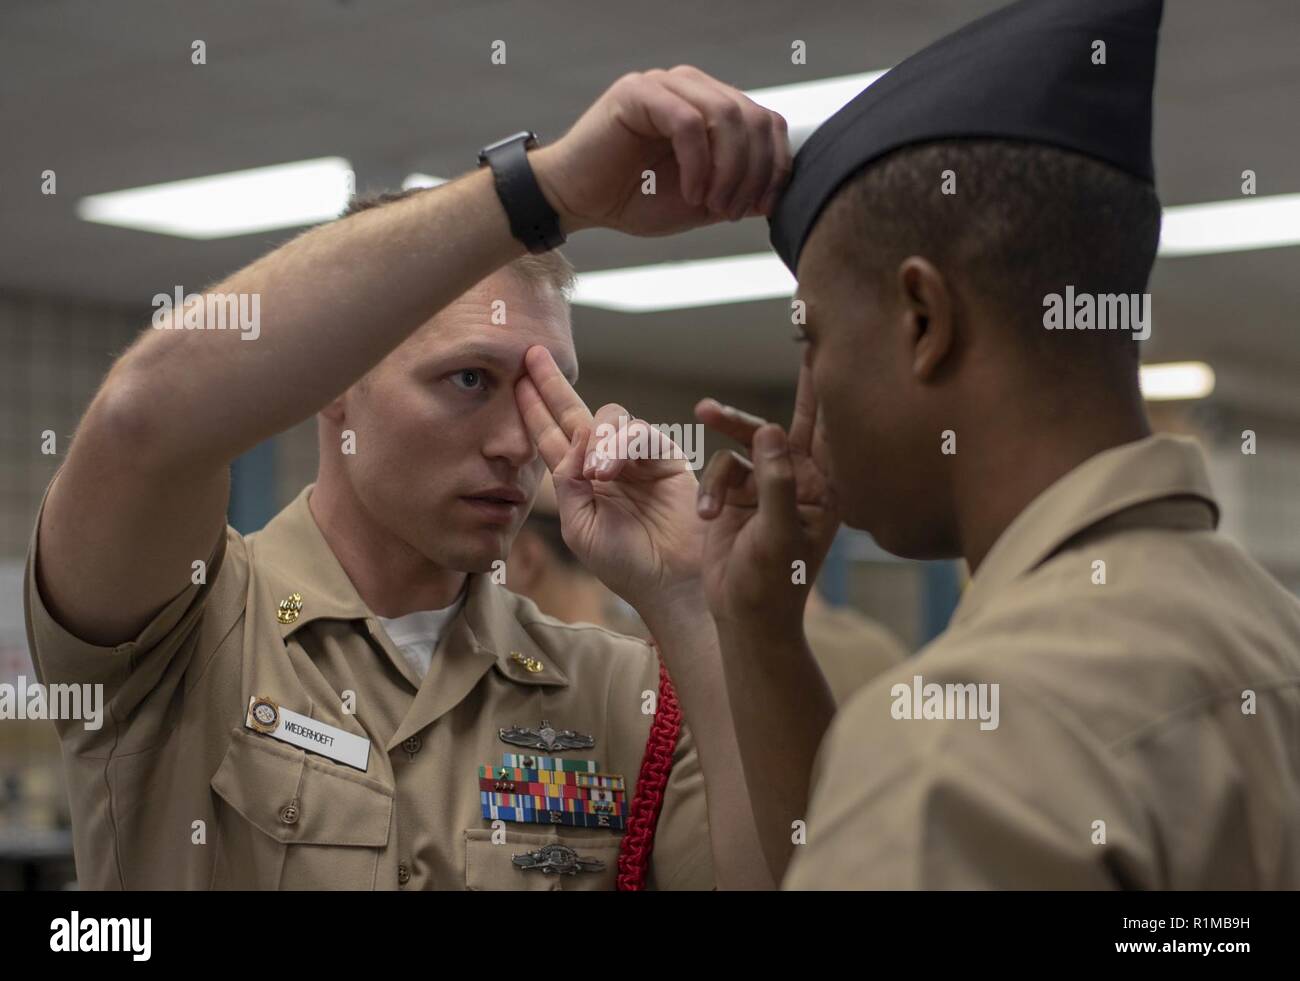 GREAT LAKES, Ill. (Oct. 23, 2018) Chief Gunner's Mate Jeremiah Wiederhoeft, a recruit division commander, assists a recruit from his division in the proper fitting and wear of the garrison cover inside the Uniform Issue building at Recruit Training Command. More than 30,000 recruits graduate annually from the Navy's only boot camp. Stock Photo